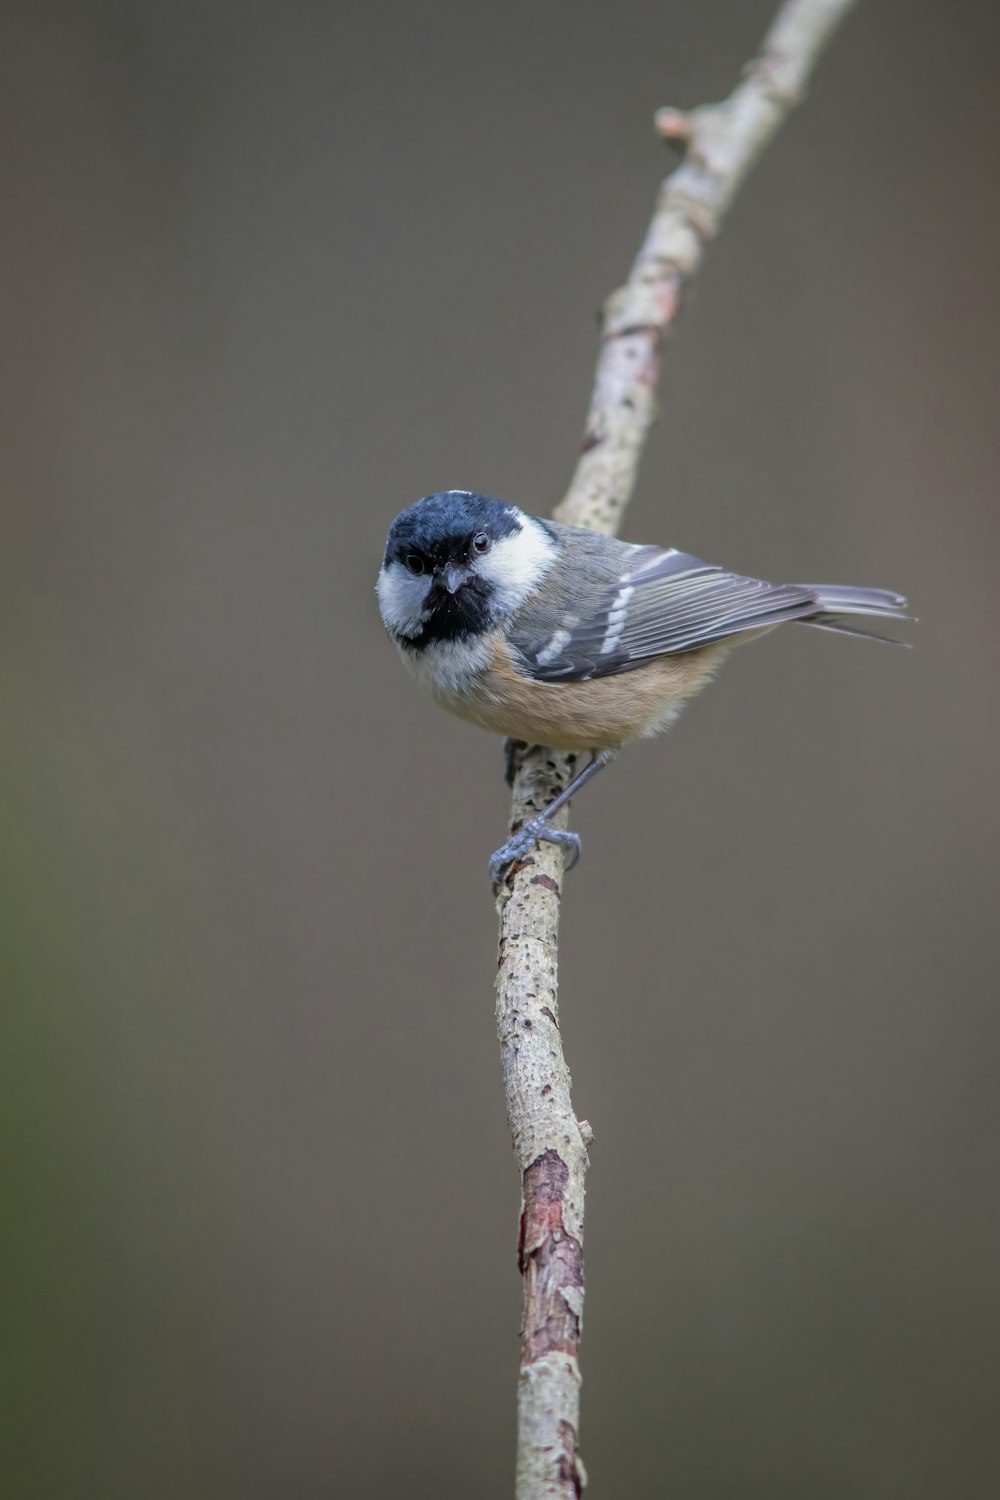 a small bird perched on a thin branch